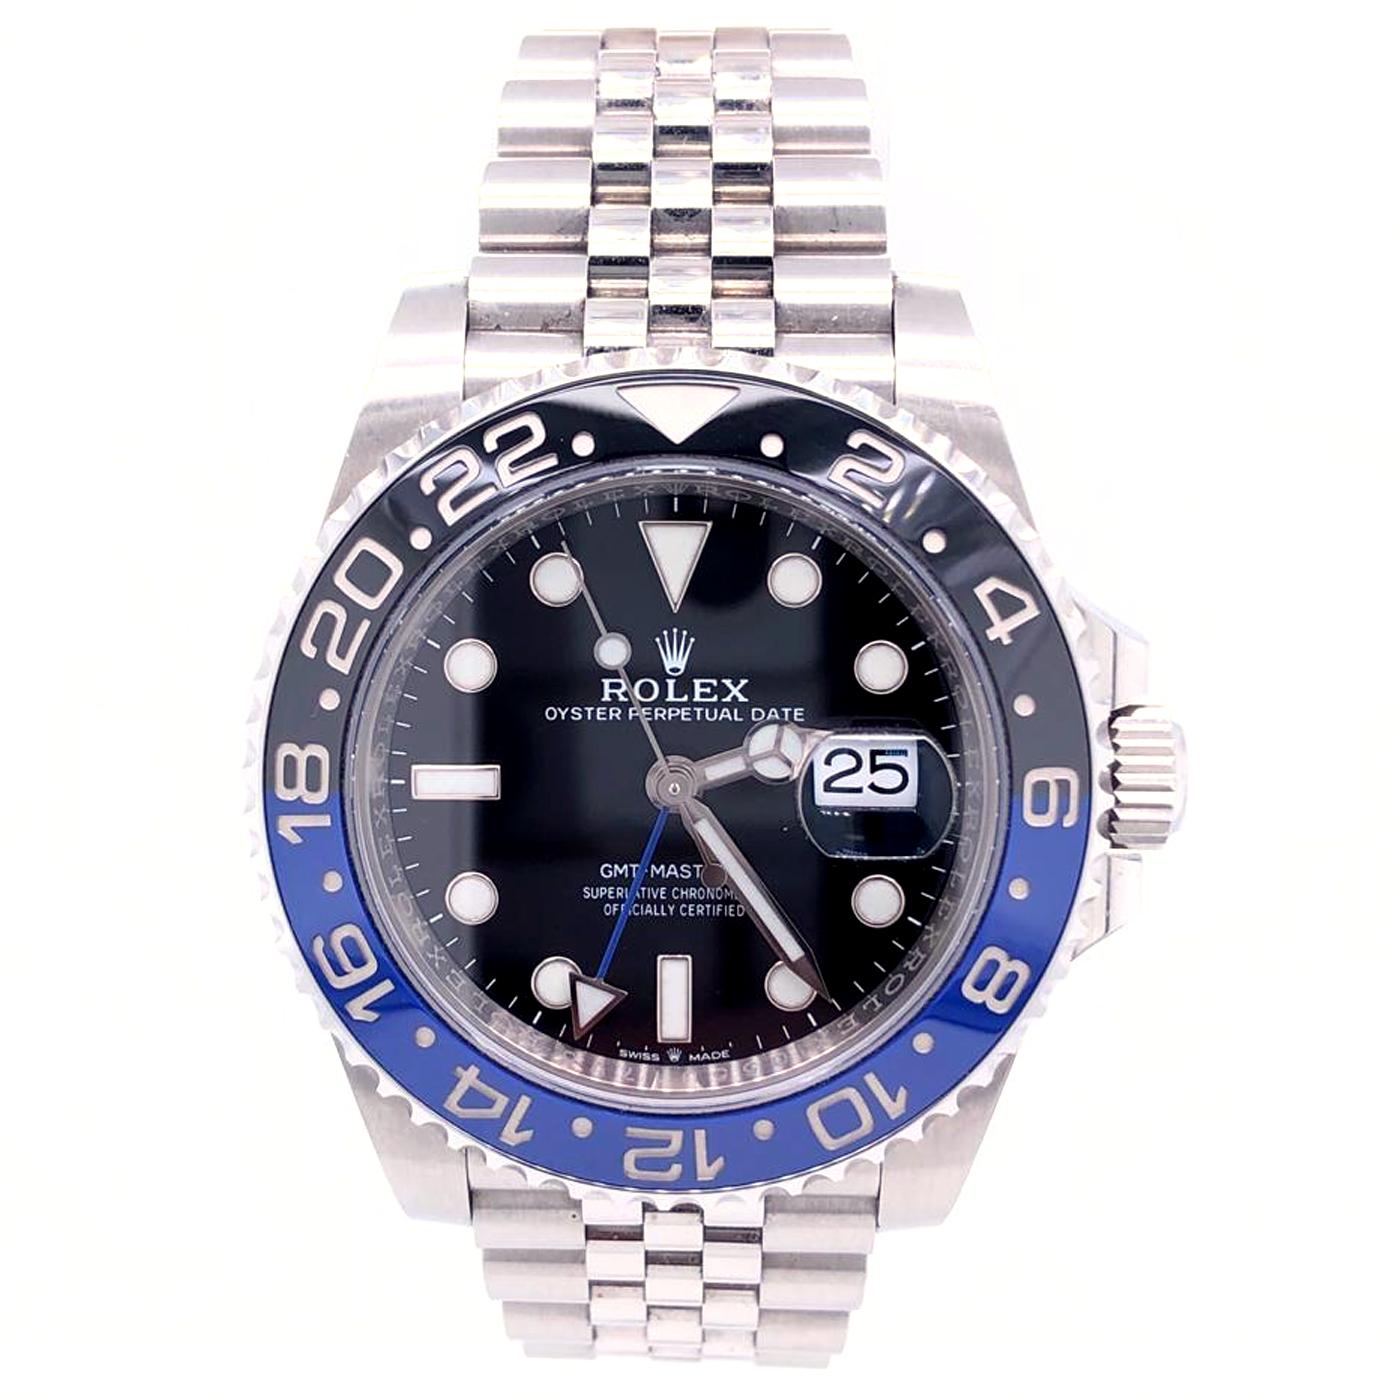 Rolex GMT Master II Batman 2019 Steel Automatic Black Dial Men Watch 126710BLNR

This model features a black dial and a blue and black Cerachrom bezel. Designed to show the time in two different time zones simultaneously during intercontinental